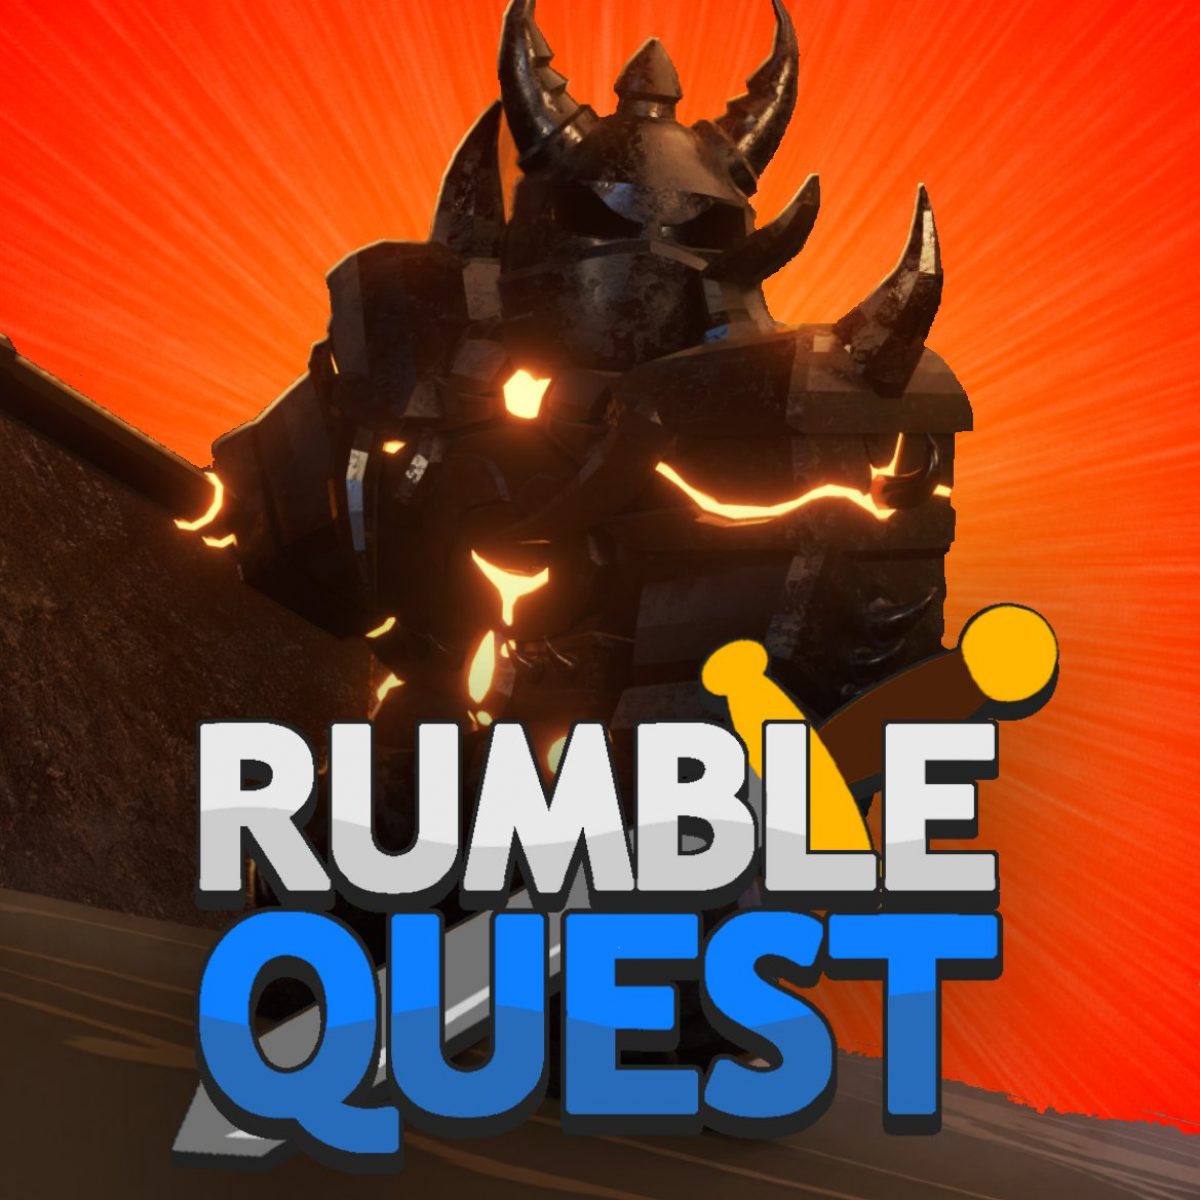 Rapid rumble codes. Рамбл квест. Рамбл квест РОБЛОКС. Dungeon Quest. Dungeon Quest Roblox.